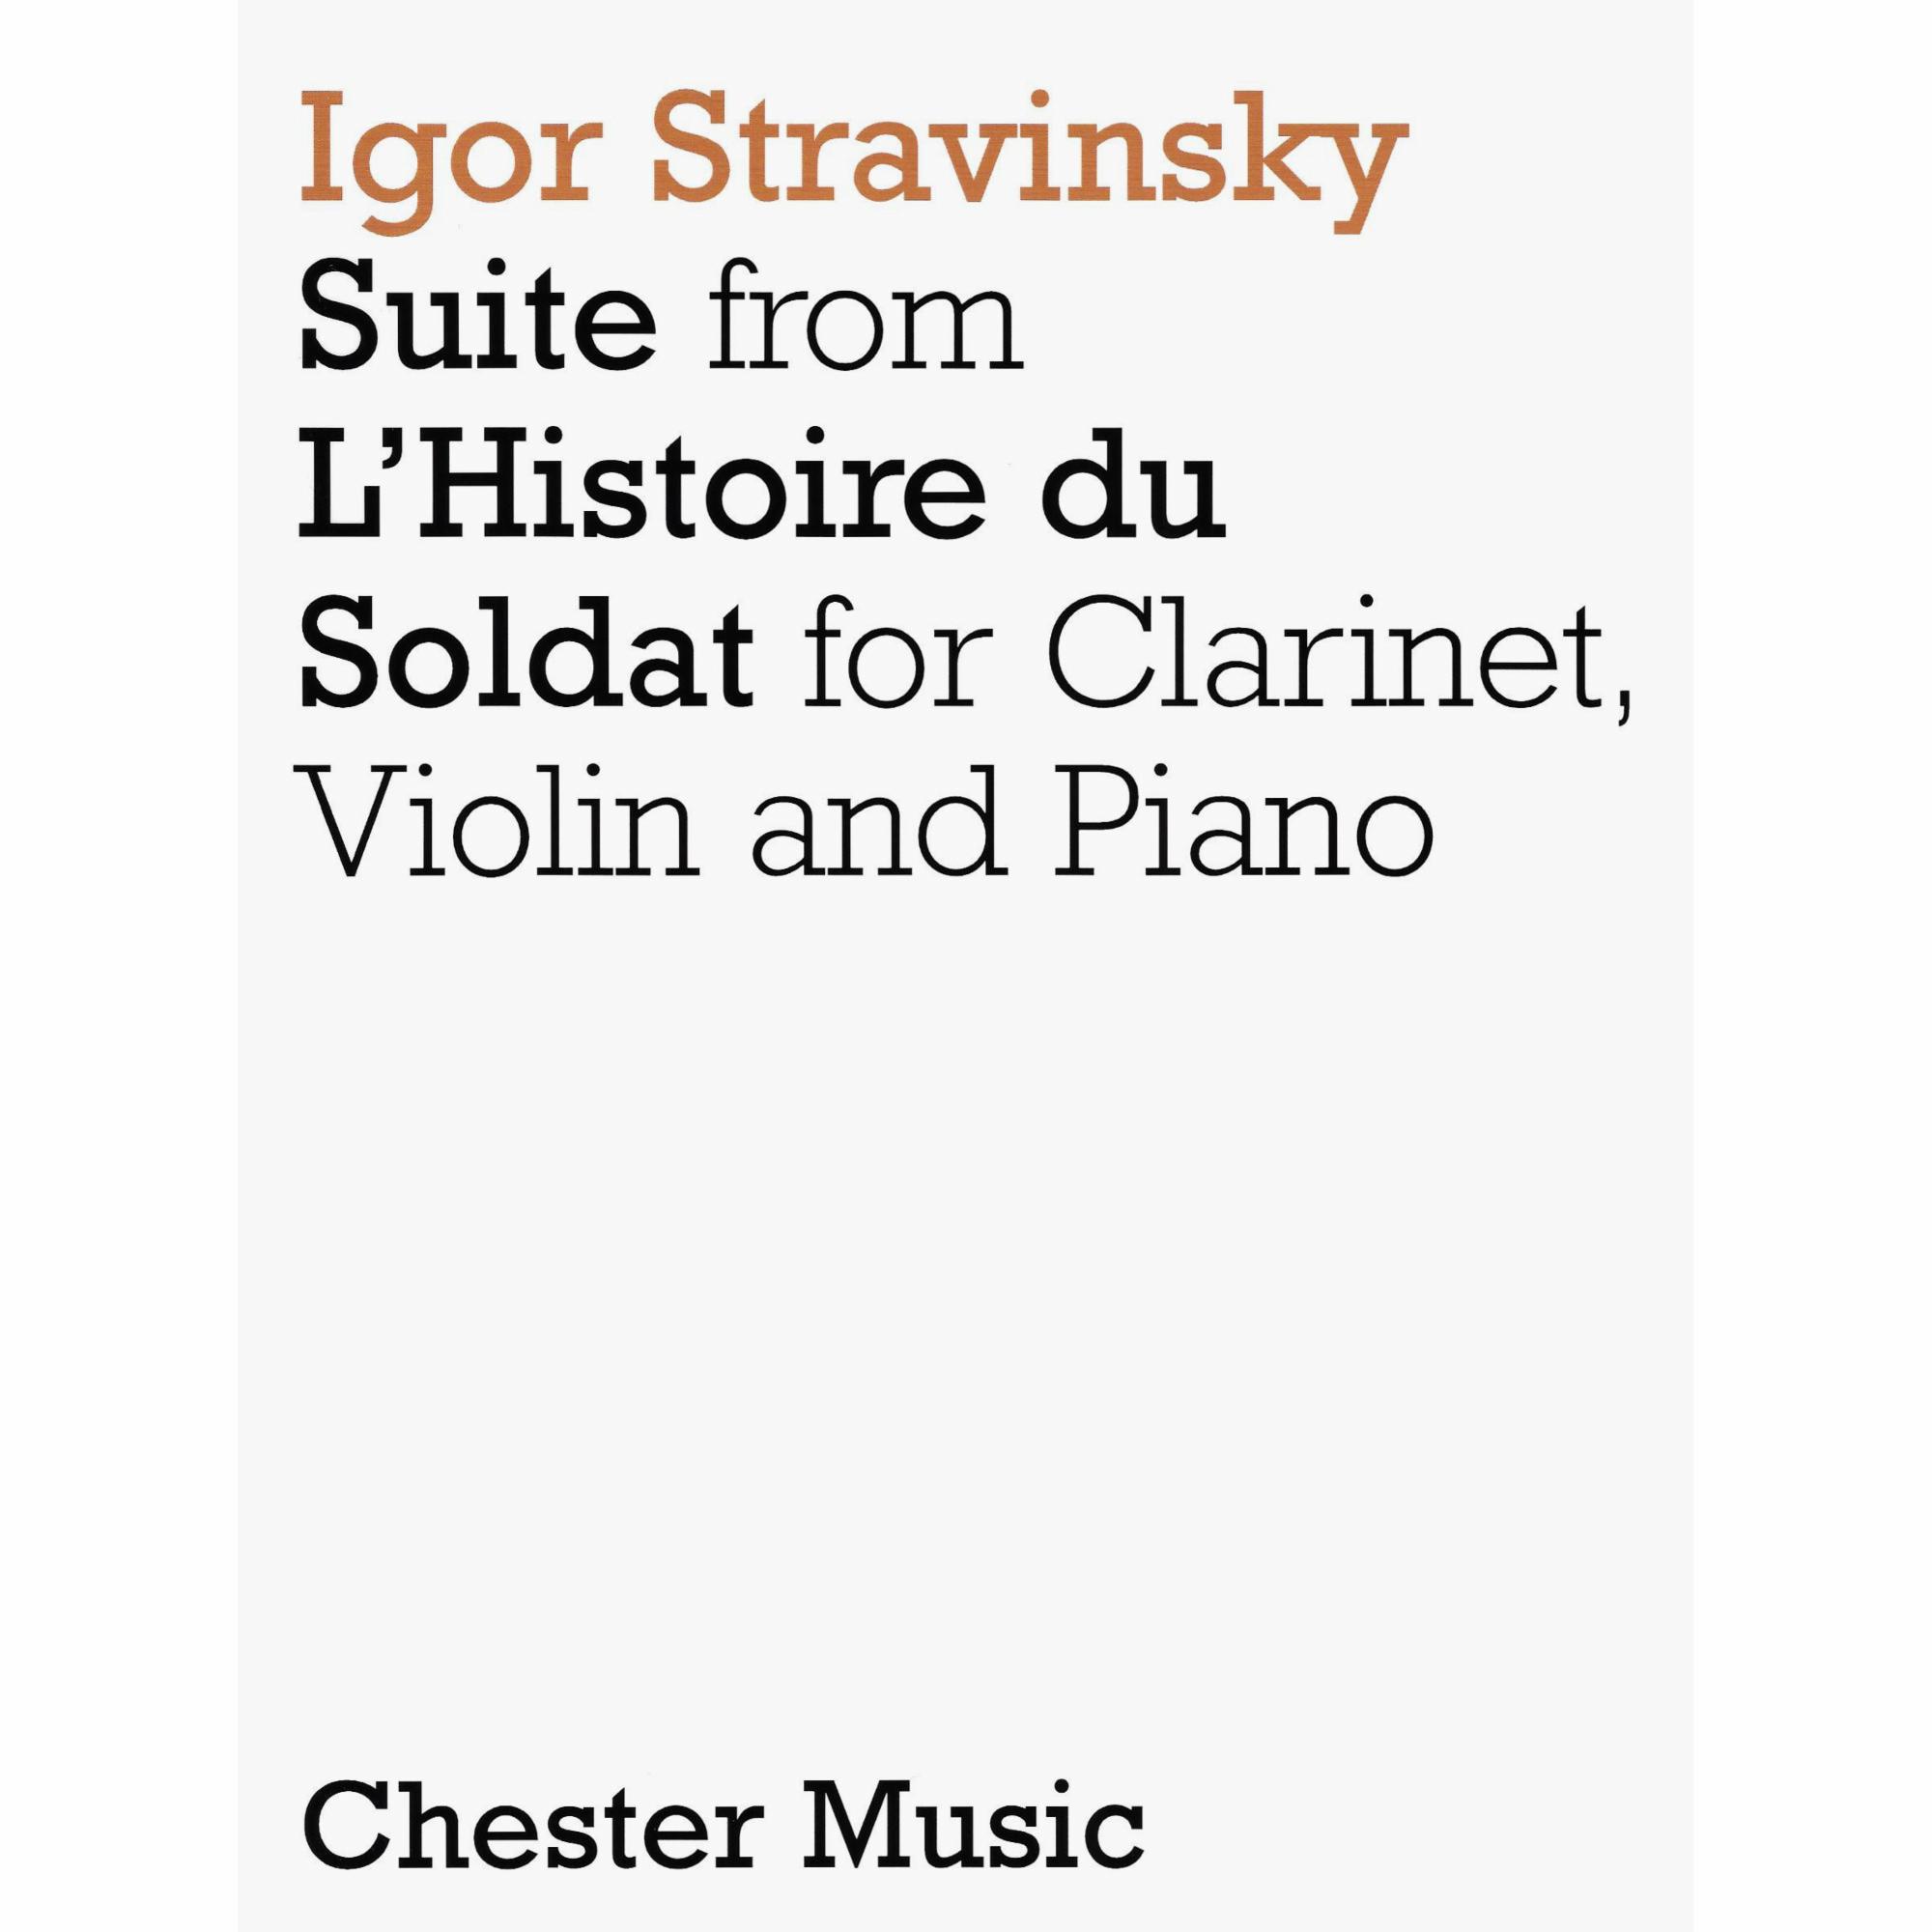 Stravinsky -- Suite from L'Histoire du Soldat for Clarinet, Violin and Piano